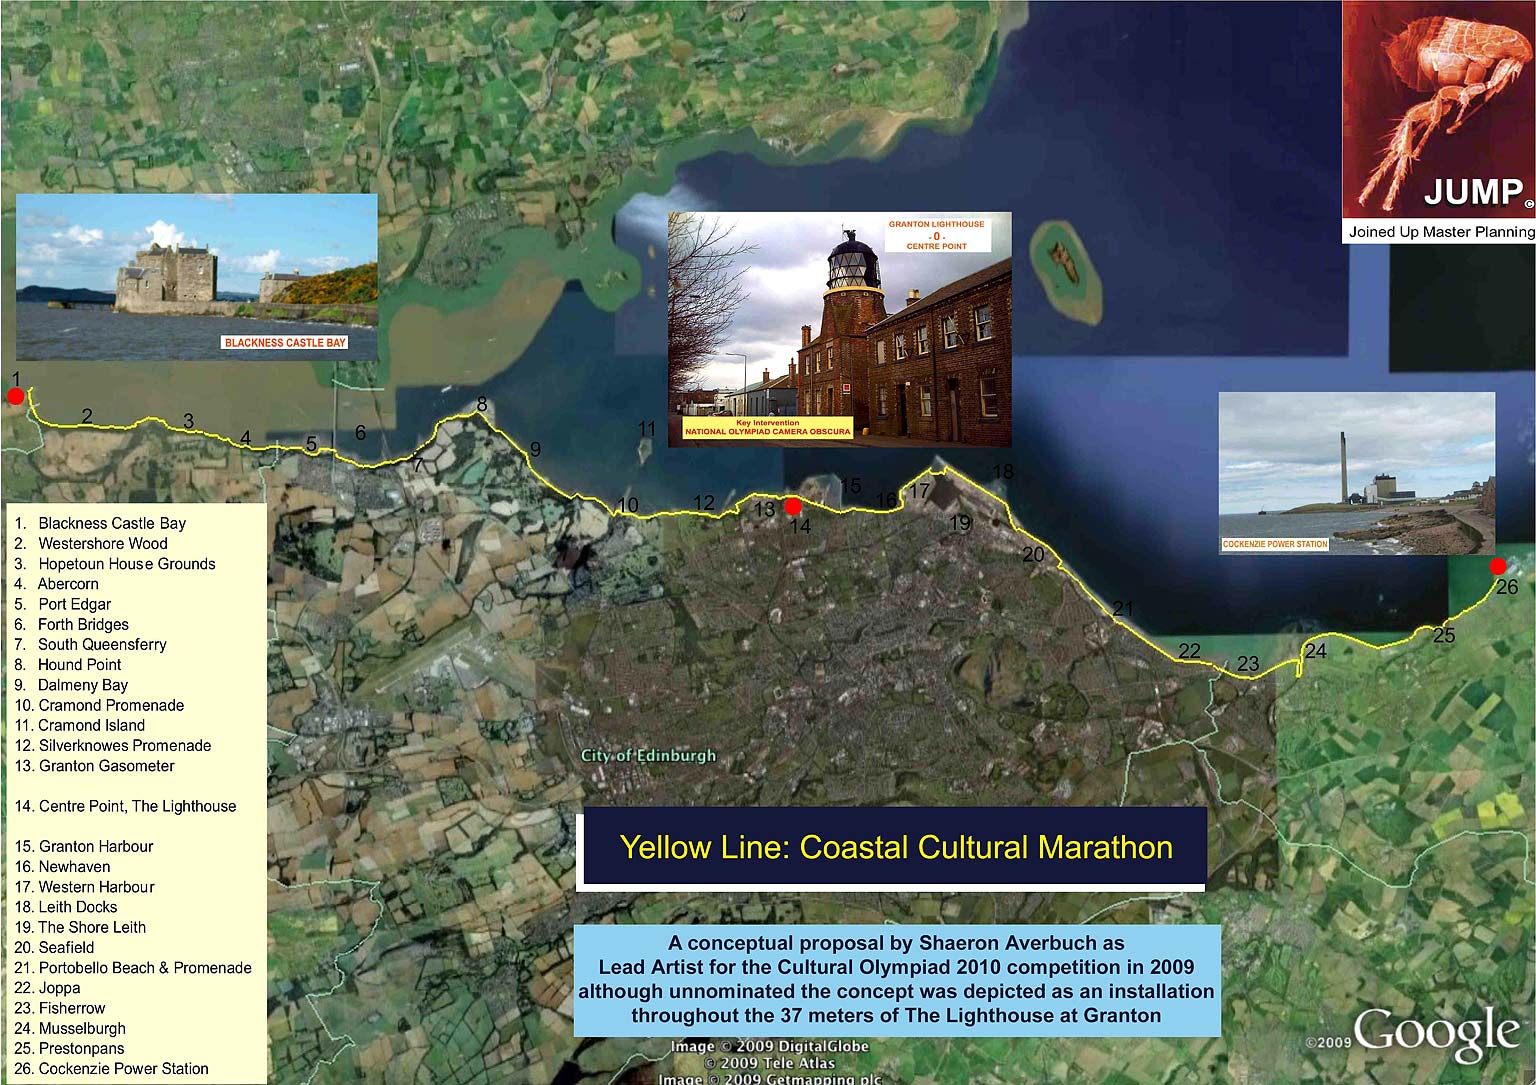 'Coastal Cultural Marathon, 2010' - an exhibit at Granton Lighthouse in the Cultural Olympiad 2010 Competition, held in 2009